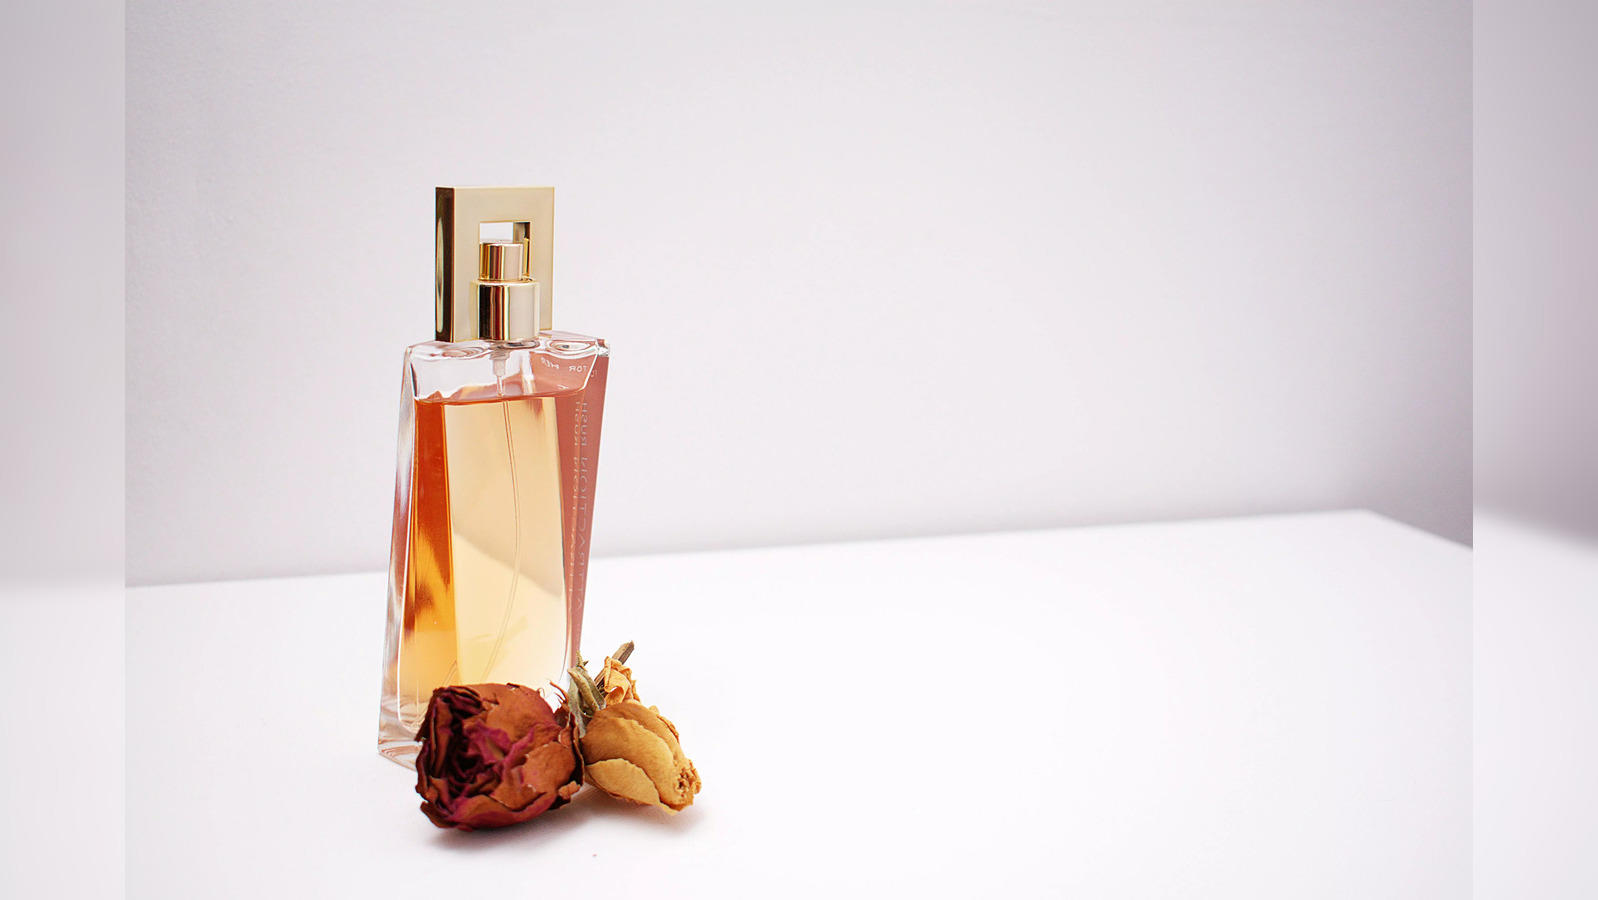 How to start your own perfume business - Perfumes for Africa